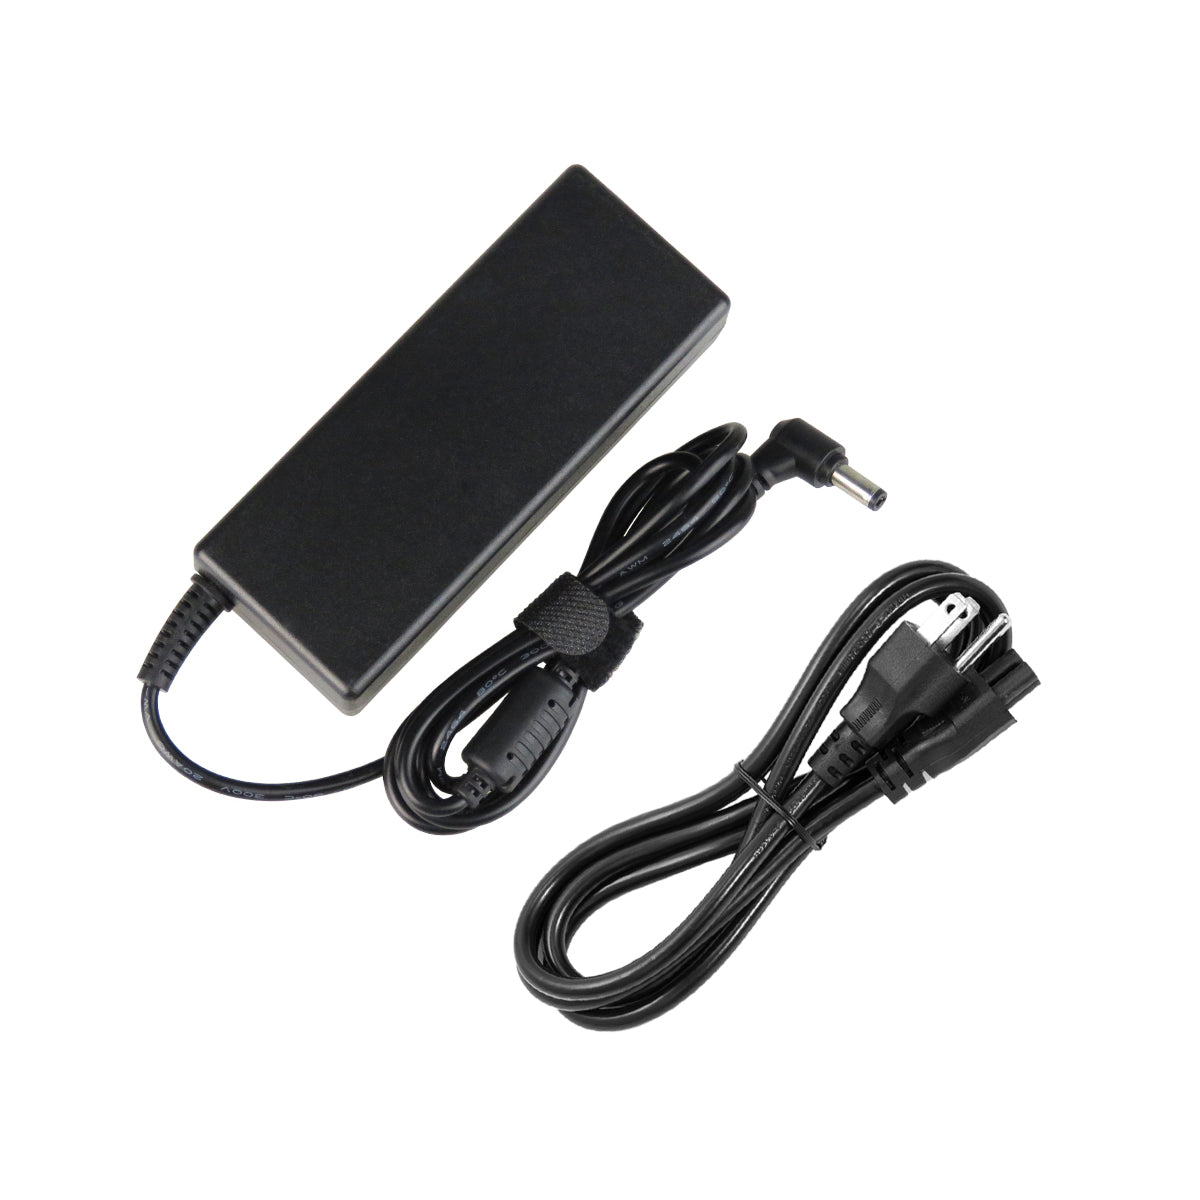 AC Adapter Charger for ASUS X54L-SX049V Notebook.